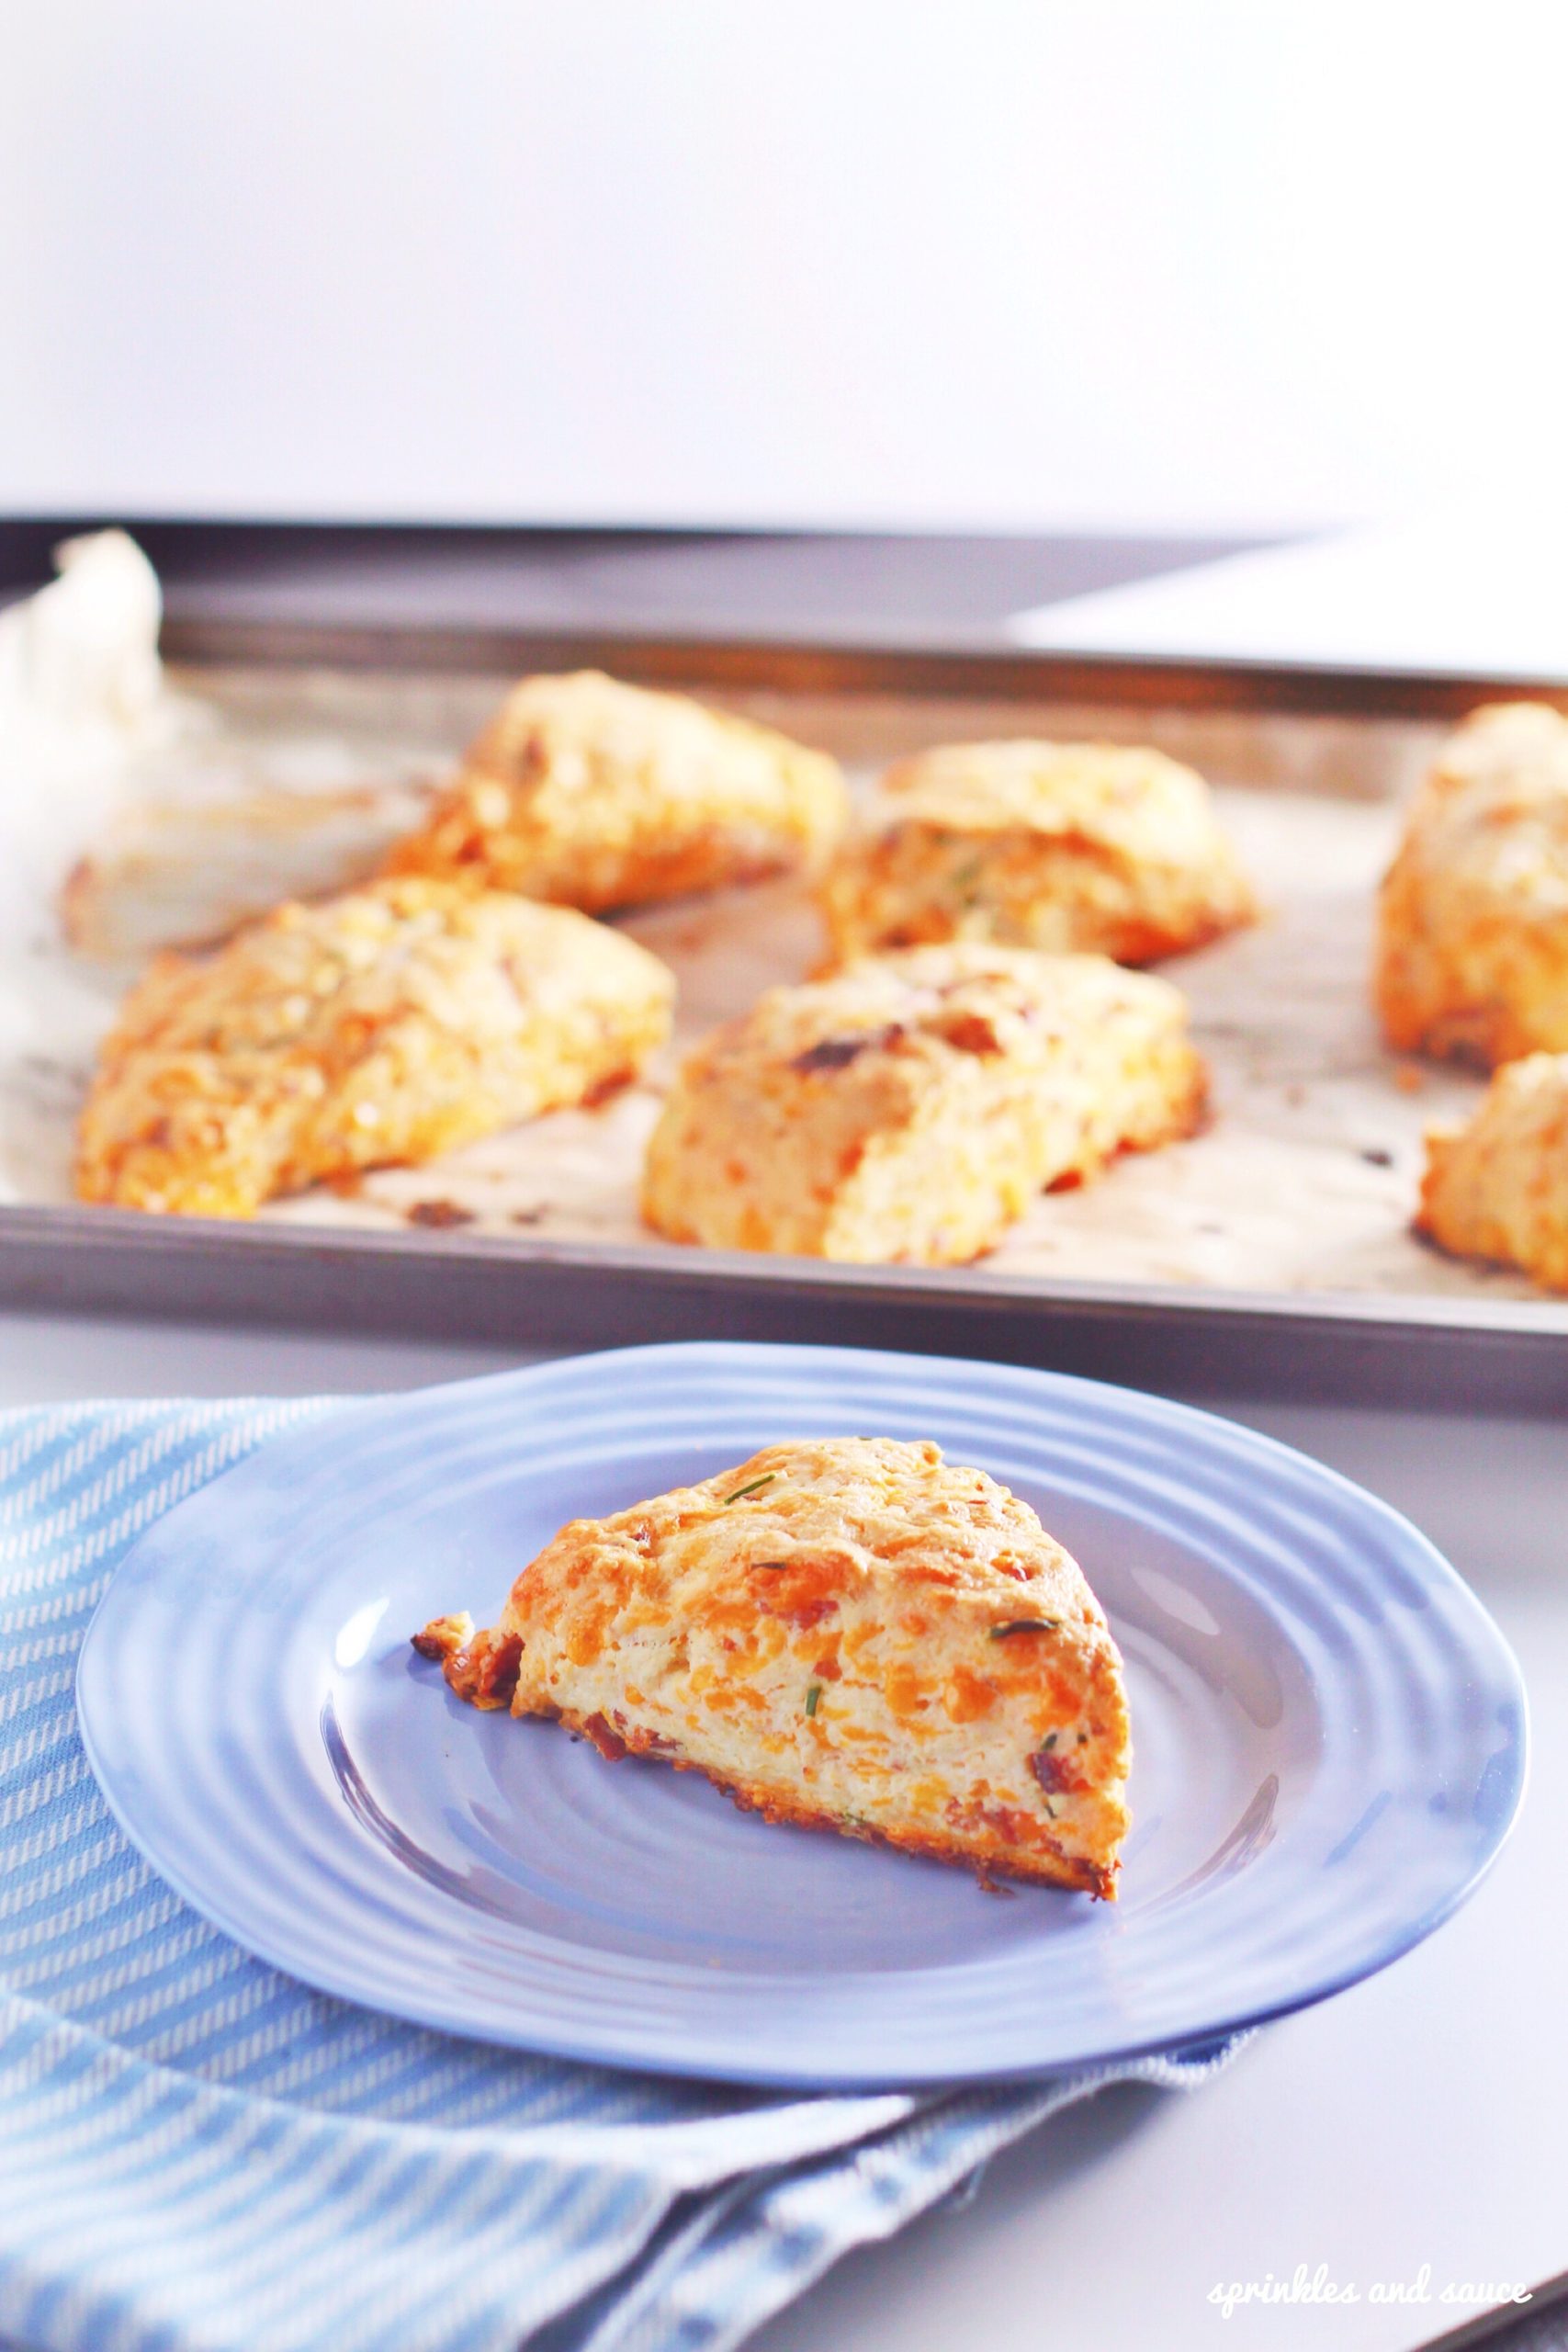 Bacon, Cheese and Chive Scones